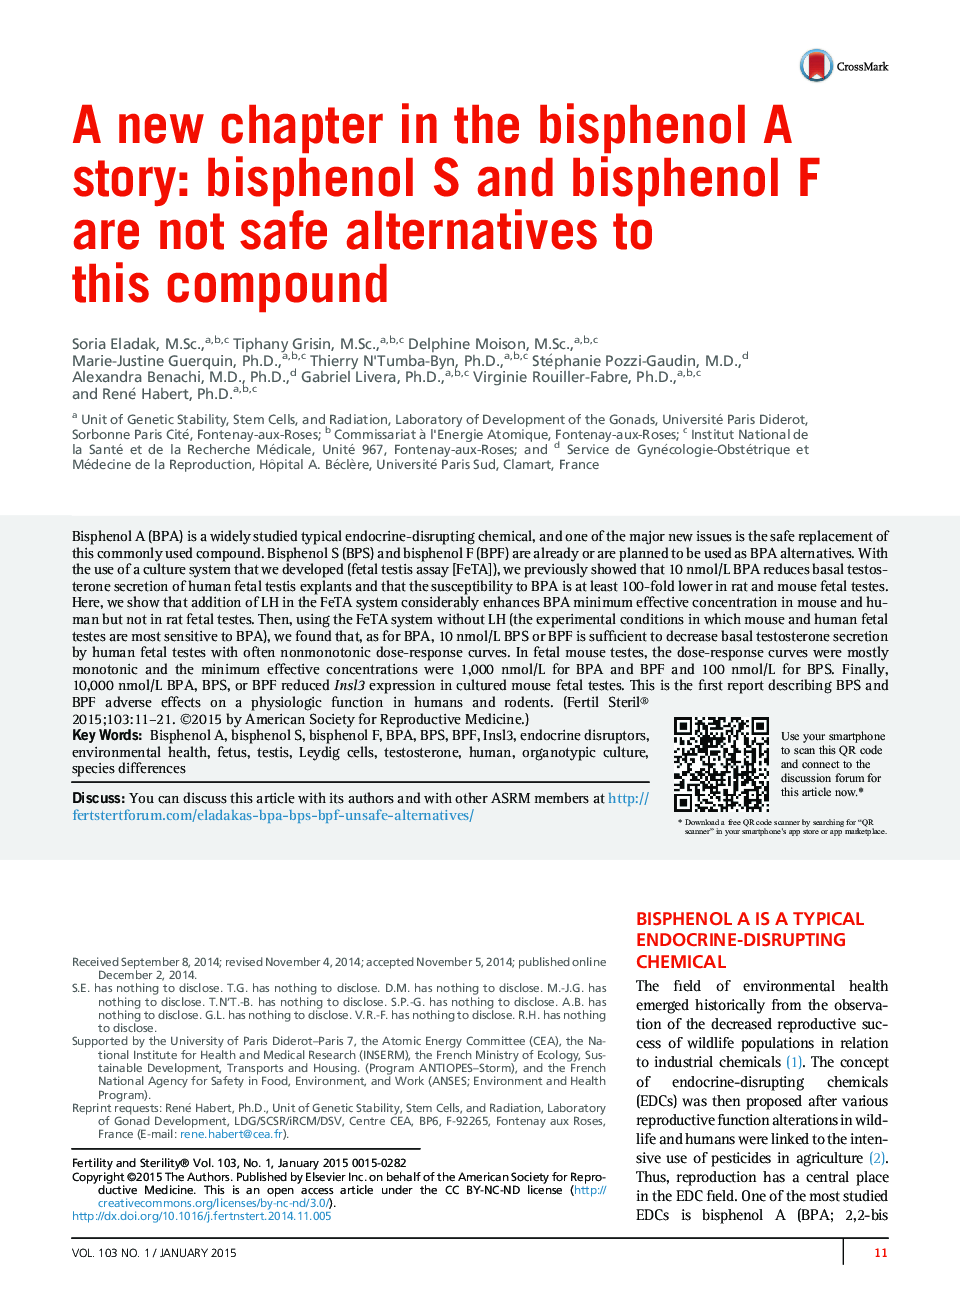 A new chapter in the bisphenol A story: bisphenol S and bisphenol F are not safe alternatives to this compound